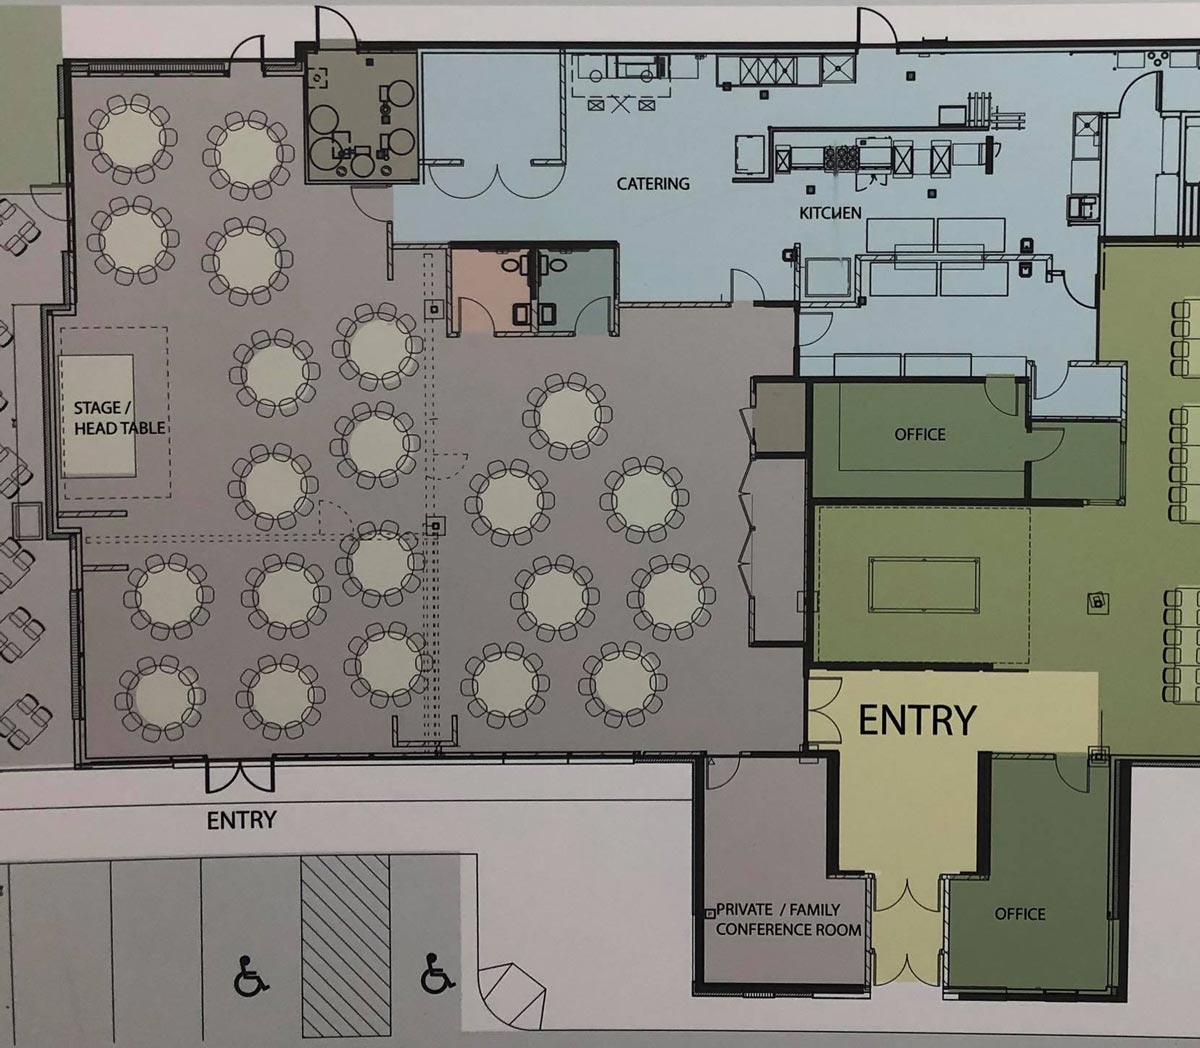 Map of the interior building at the Goldstar Venue at the VFW Post 1215 banquet hall, wedding venue and event center in Rochester, MN.